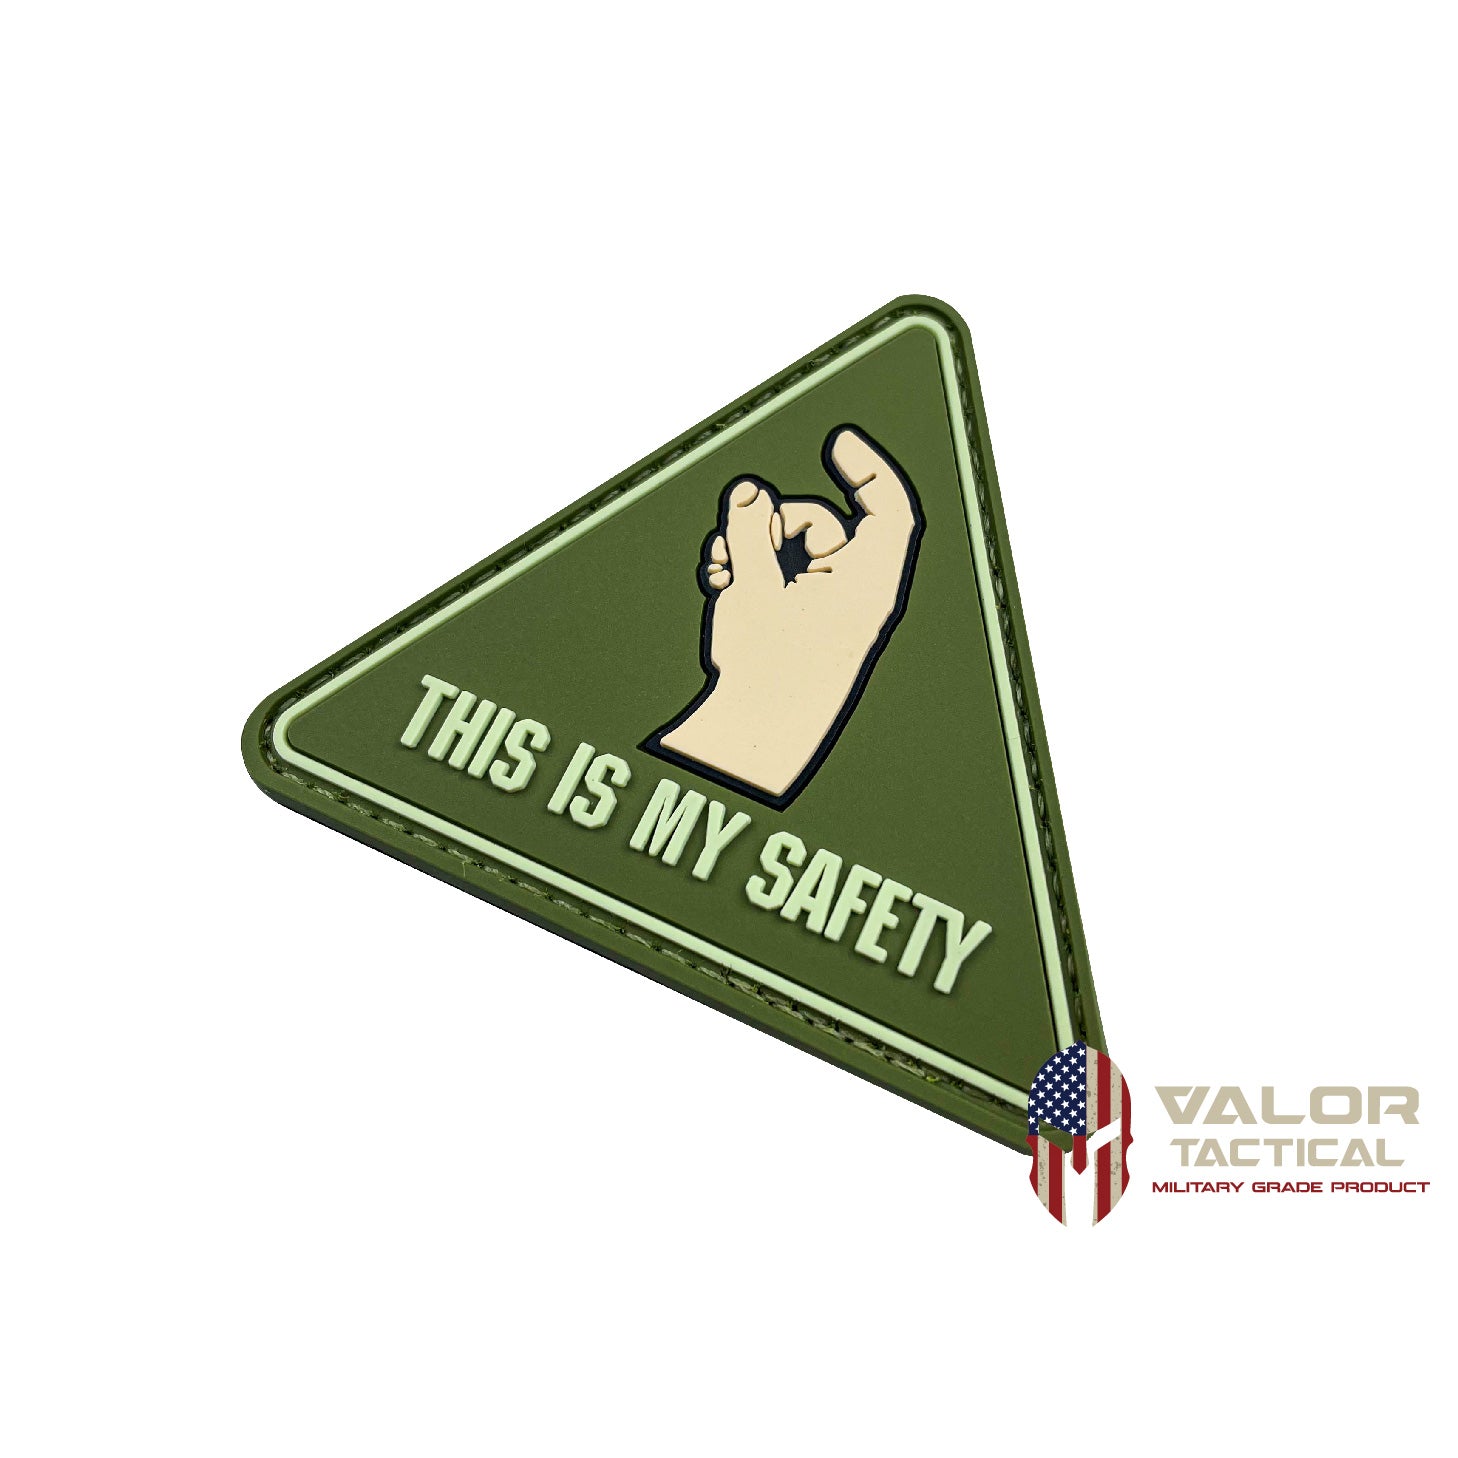 Valor PX PVC Patches - this is my safety - Ranger green